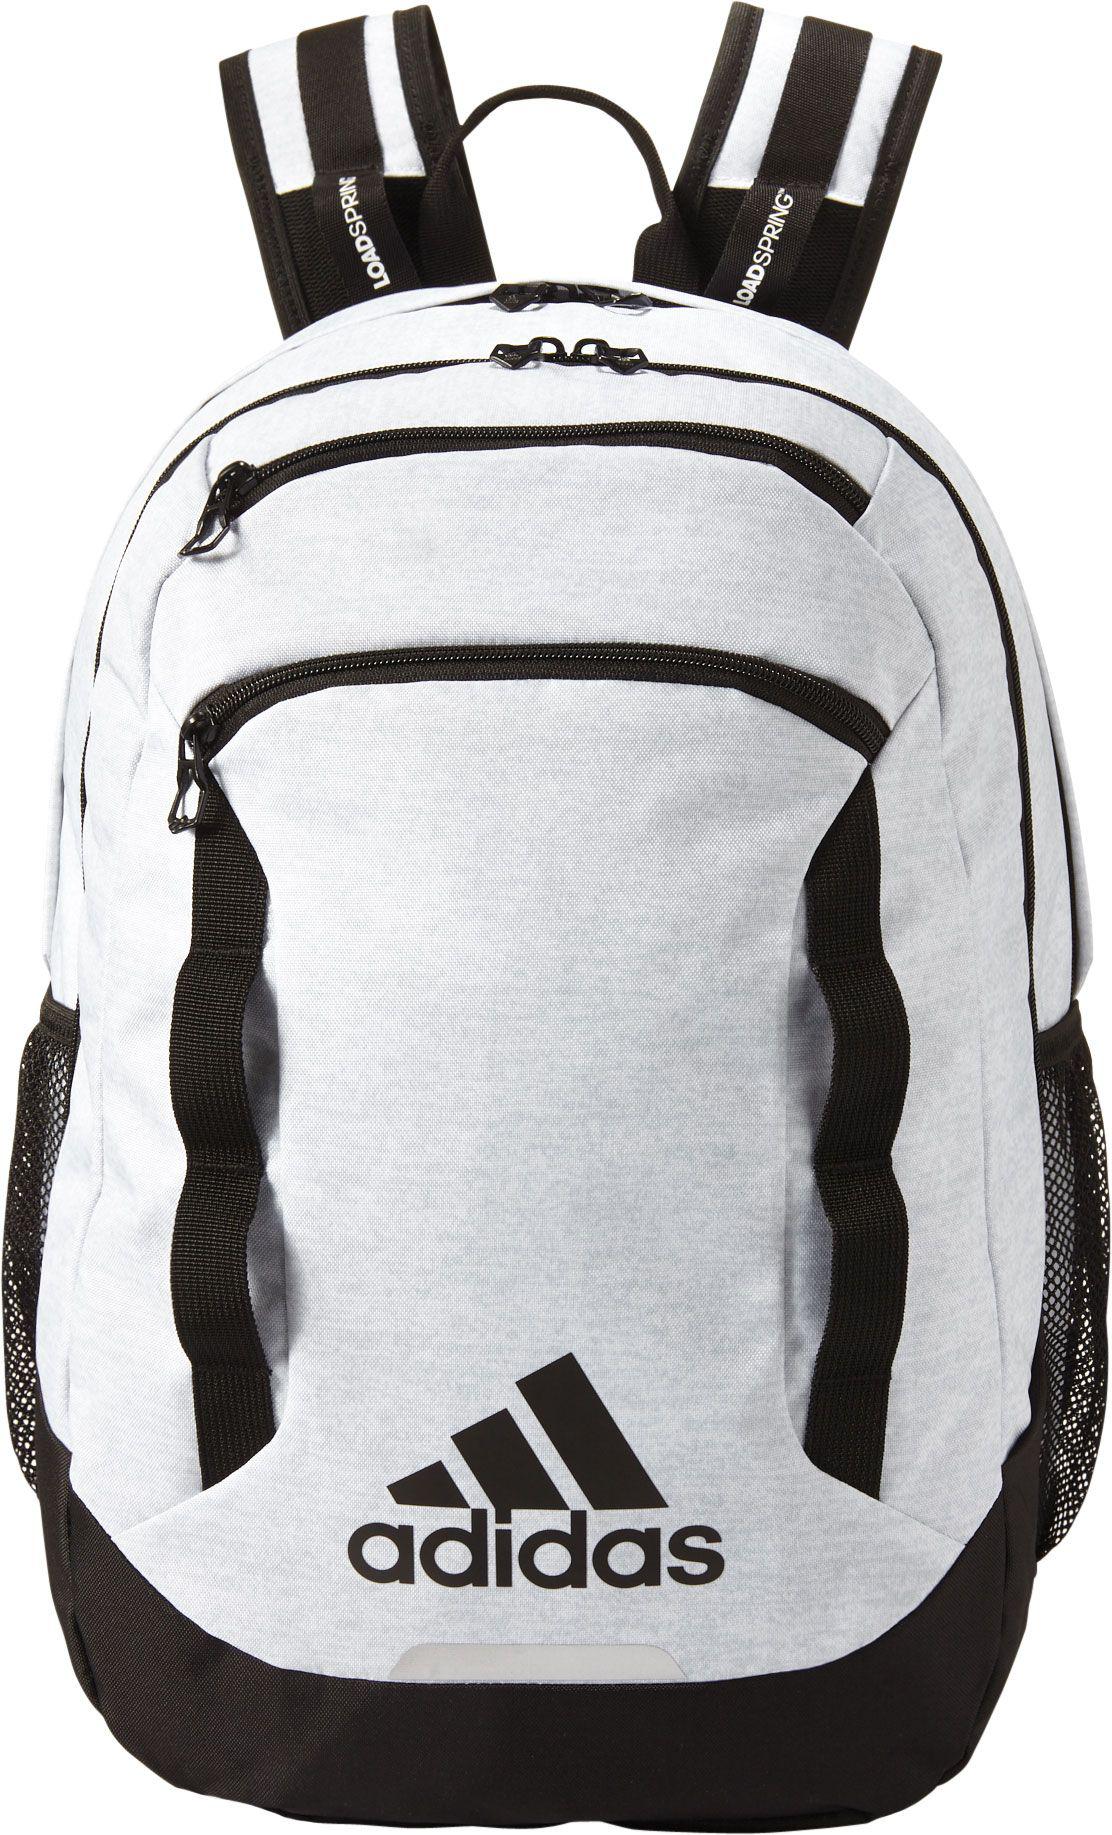 Adidas Rival Xl Backpack Shop, 60% OFF | www.rachelotoole.ie